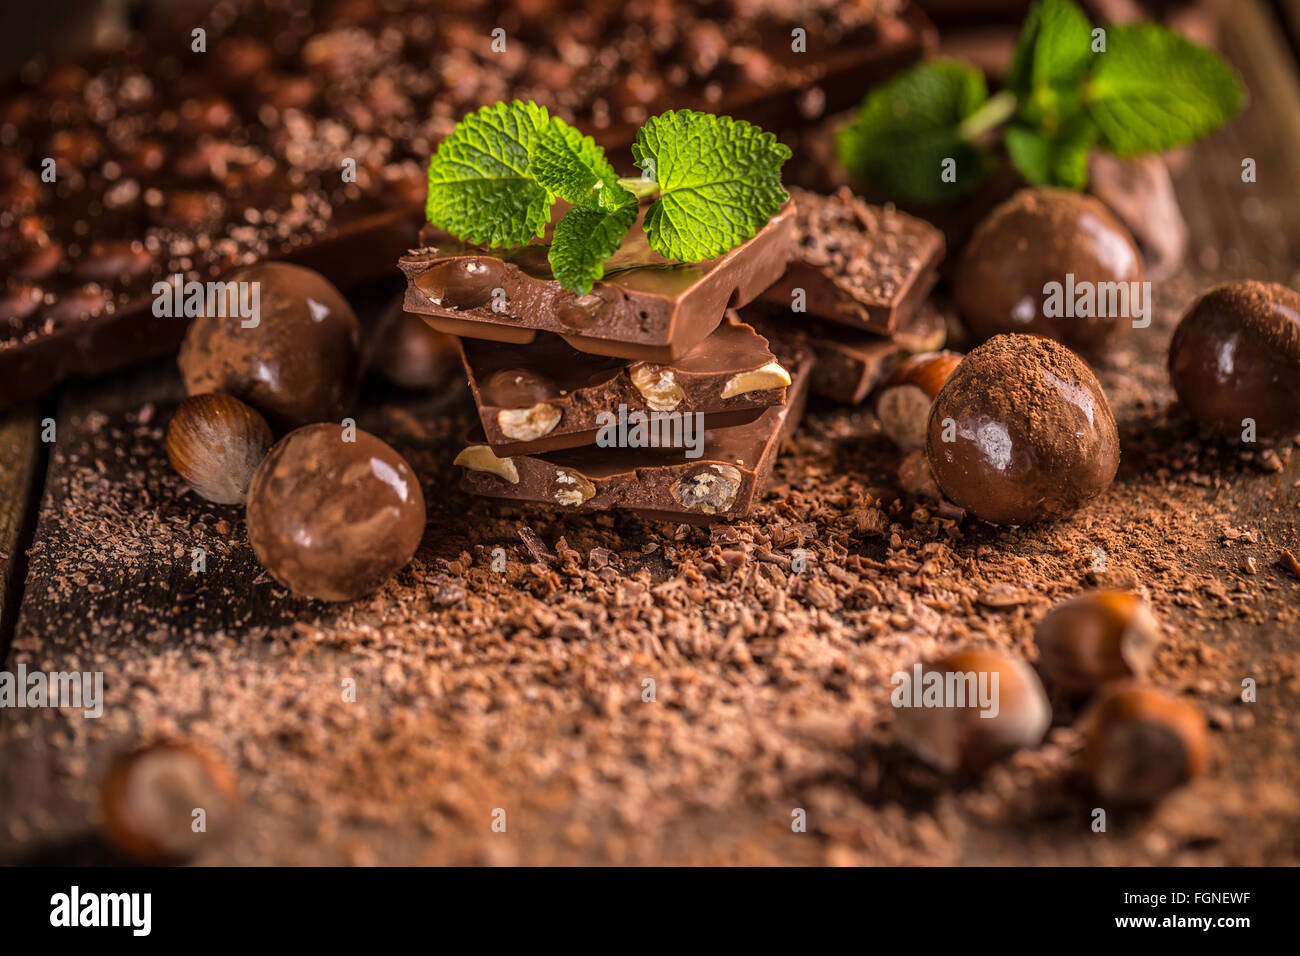 Still life of chocolate with nuts Stock Photo